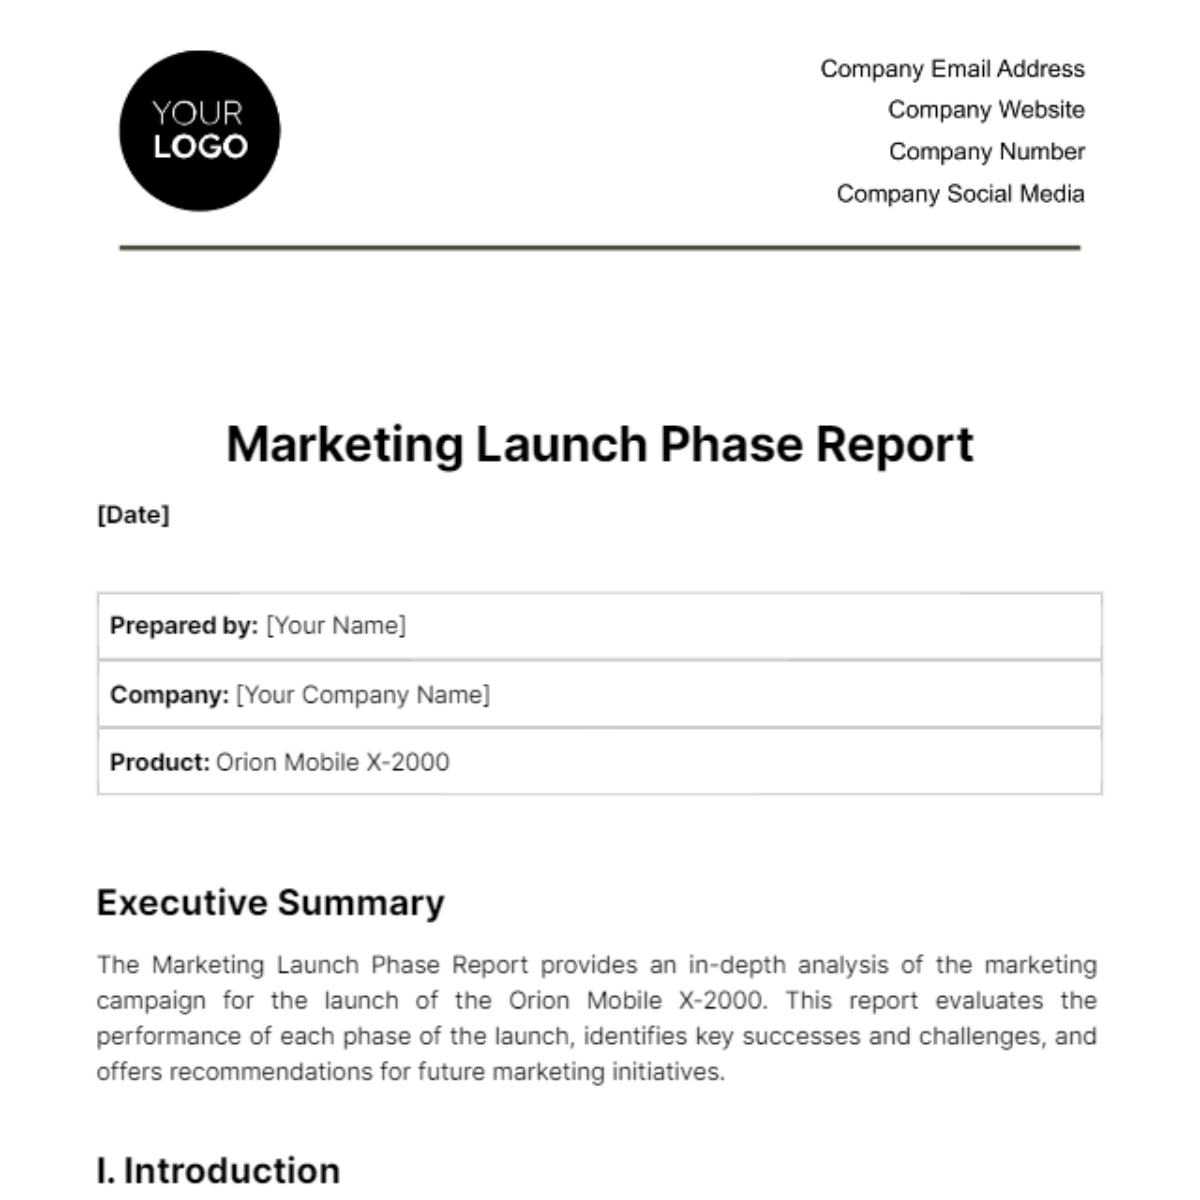 Marketing Launch Phase Report Template